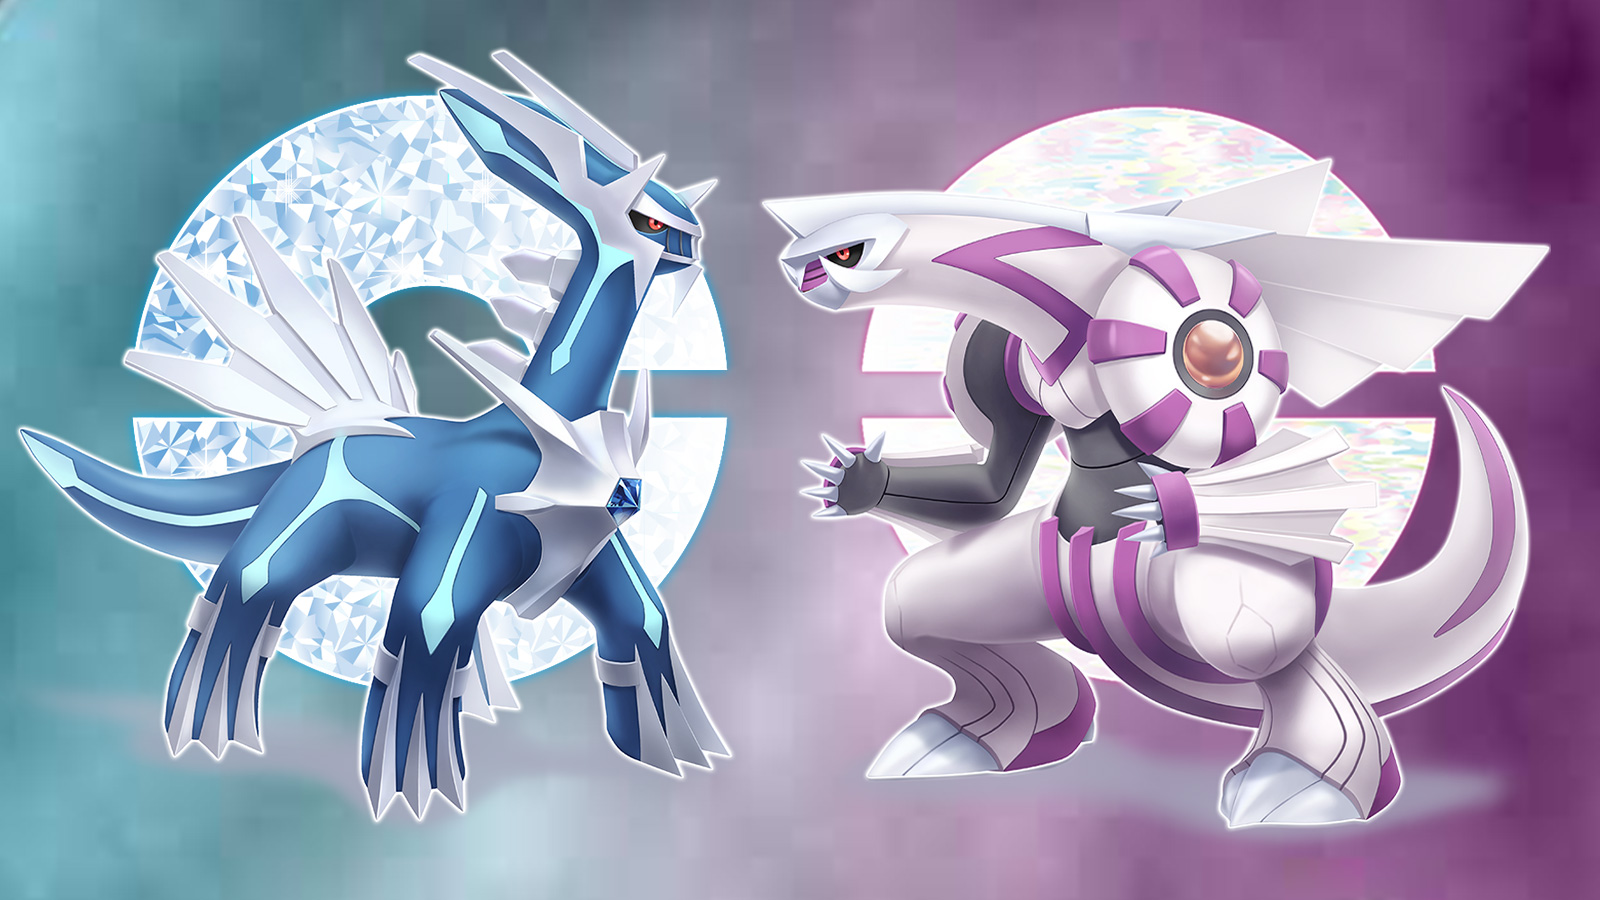 Download Pokémon Brilliant Diamond And Shining Pearl wallpapers